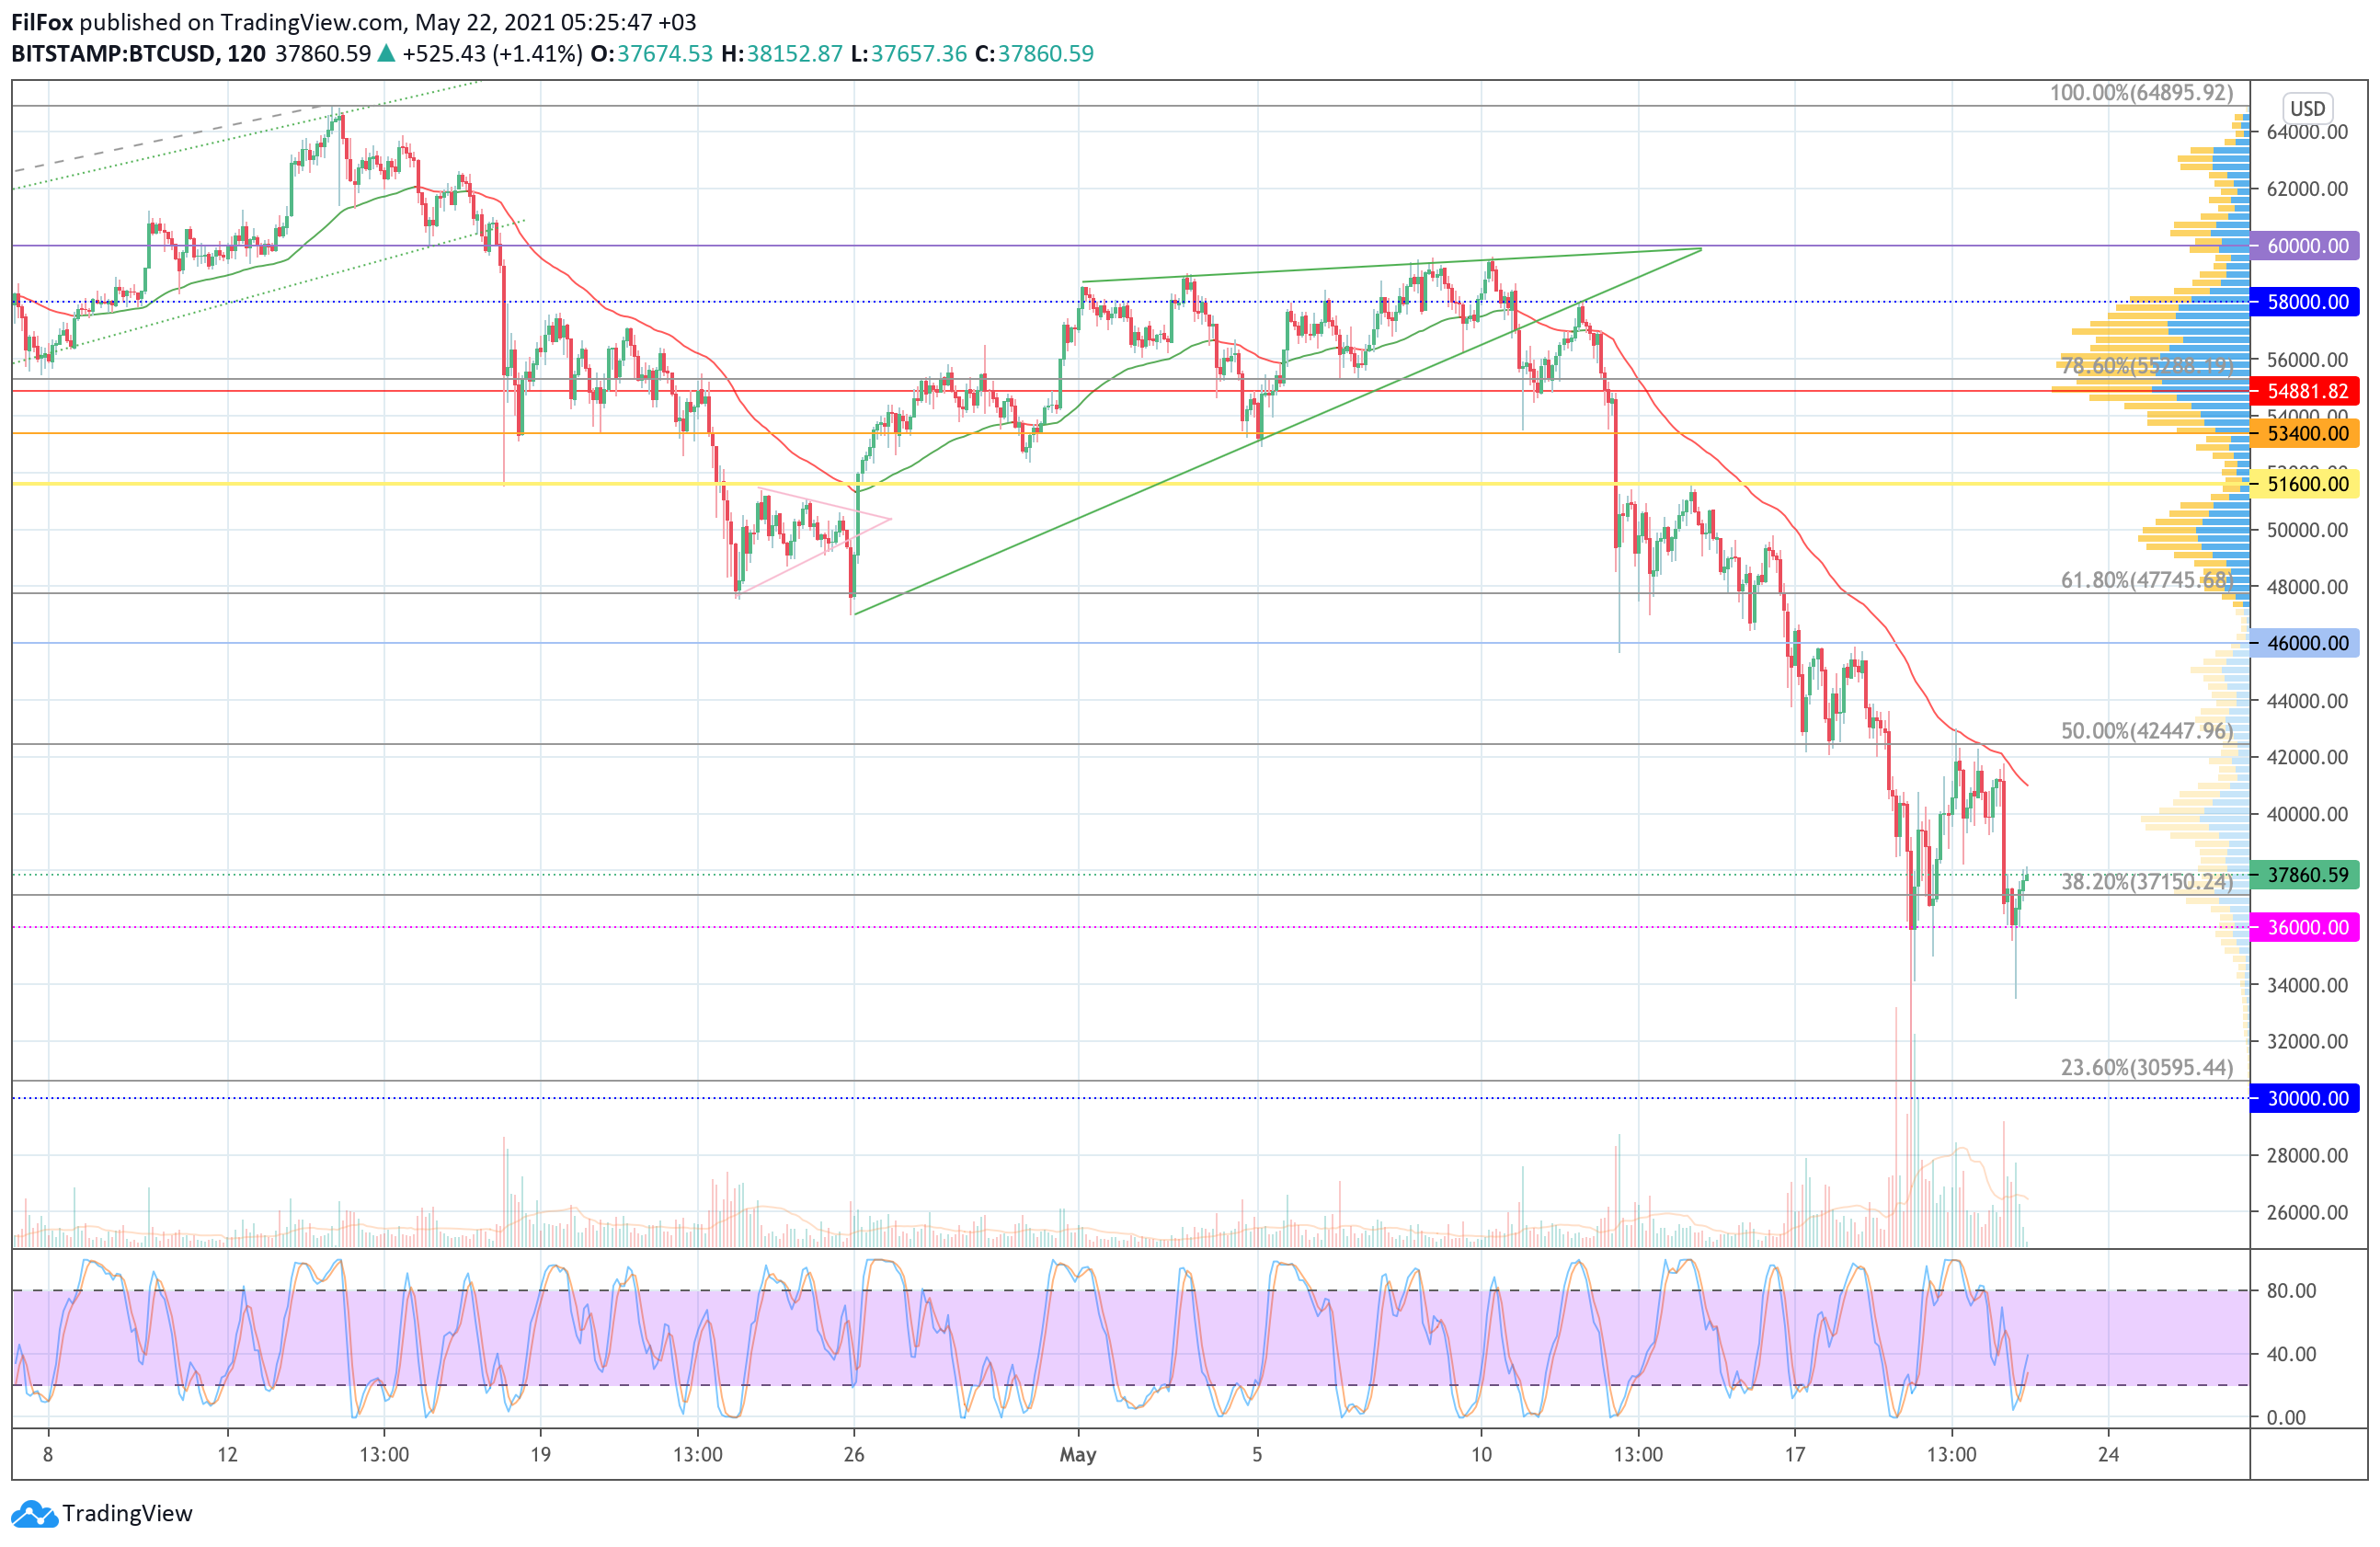 Analysis of the prices of Bitcoin, Ethereum, XRP for 05/22/2021